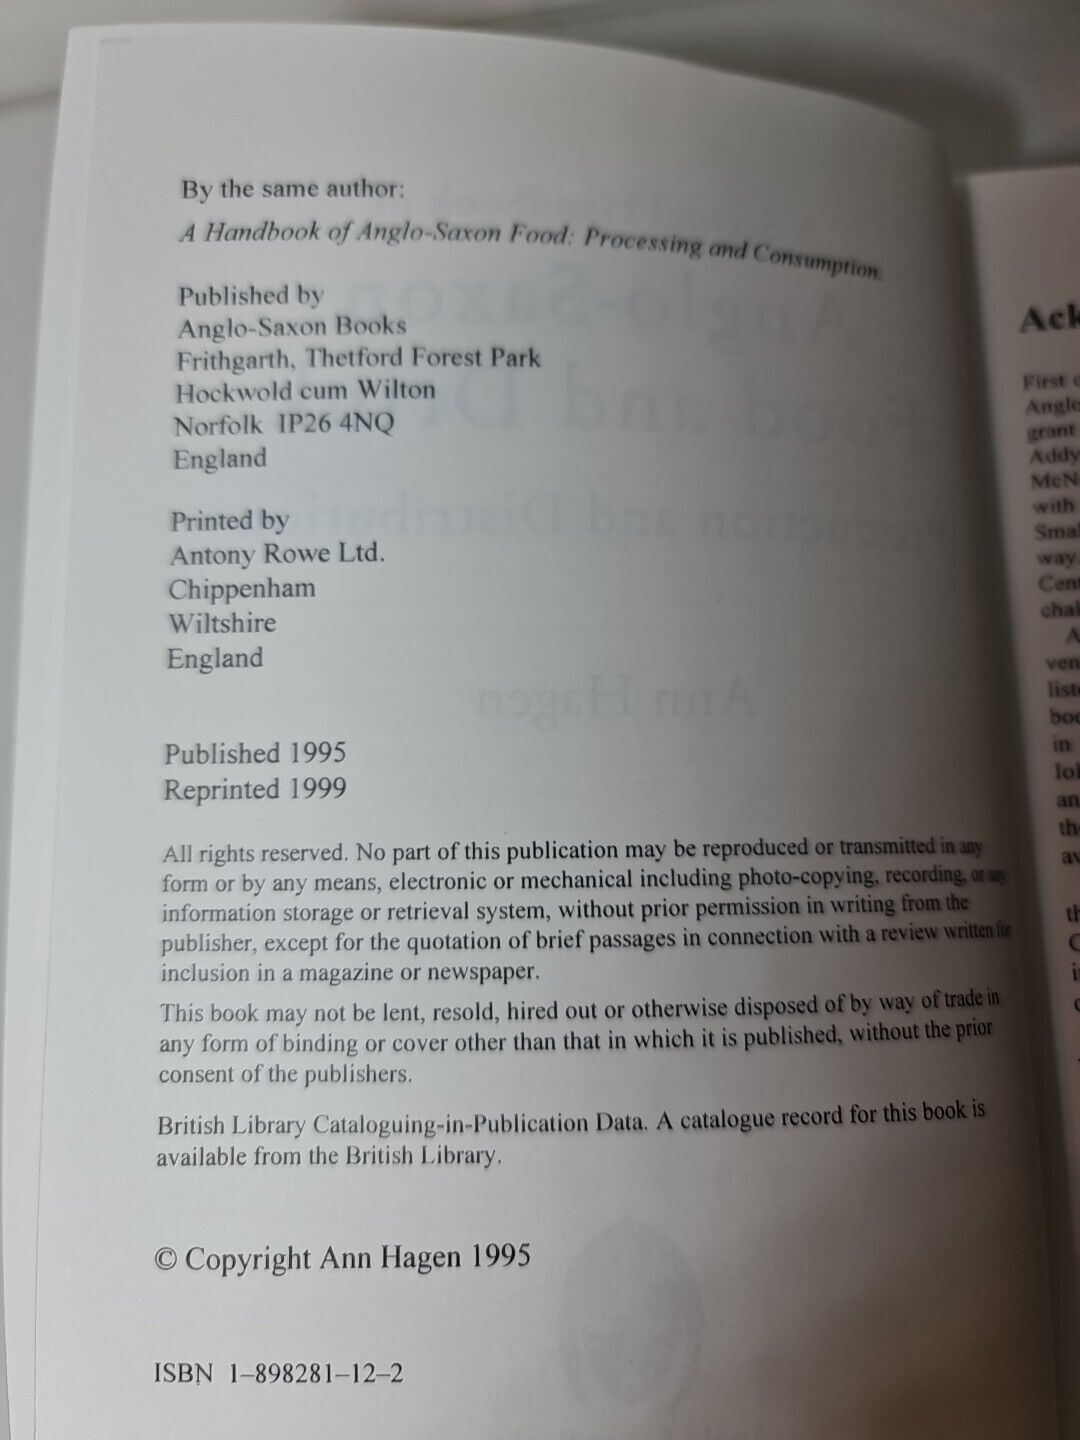 A Second Handbook of Anglo-Saxon Food & Drink: Production & Distribution (1999)